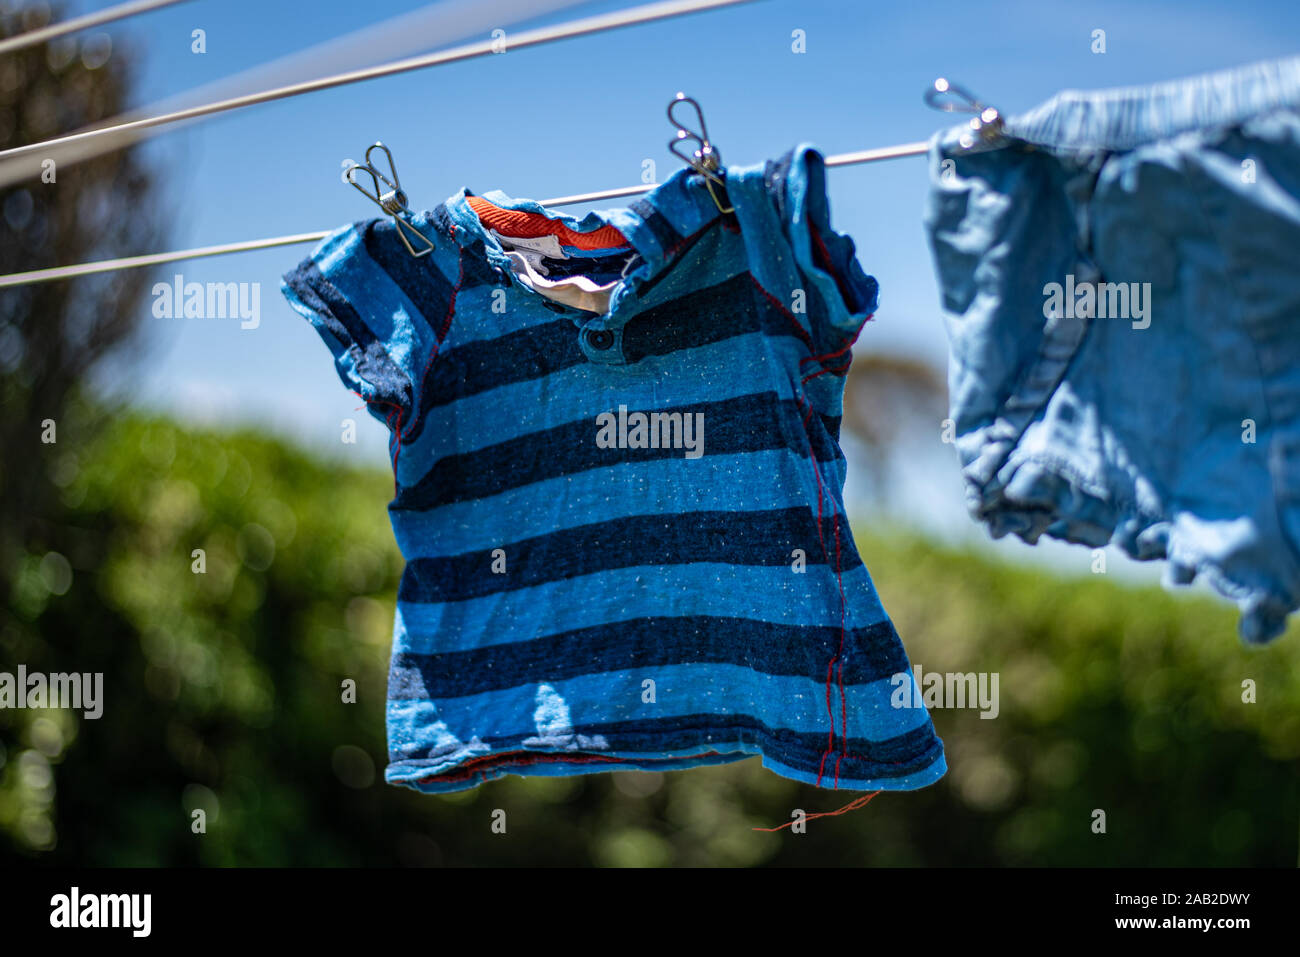 Reduce reuse recycle, be the change, metal long lasting clothes pegs, laundry drying in the sun, choose the earth, environmentally friendly. Stock Photo